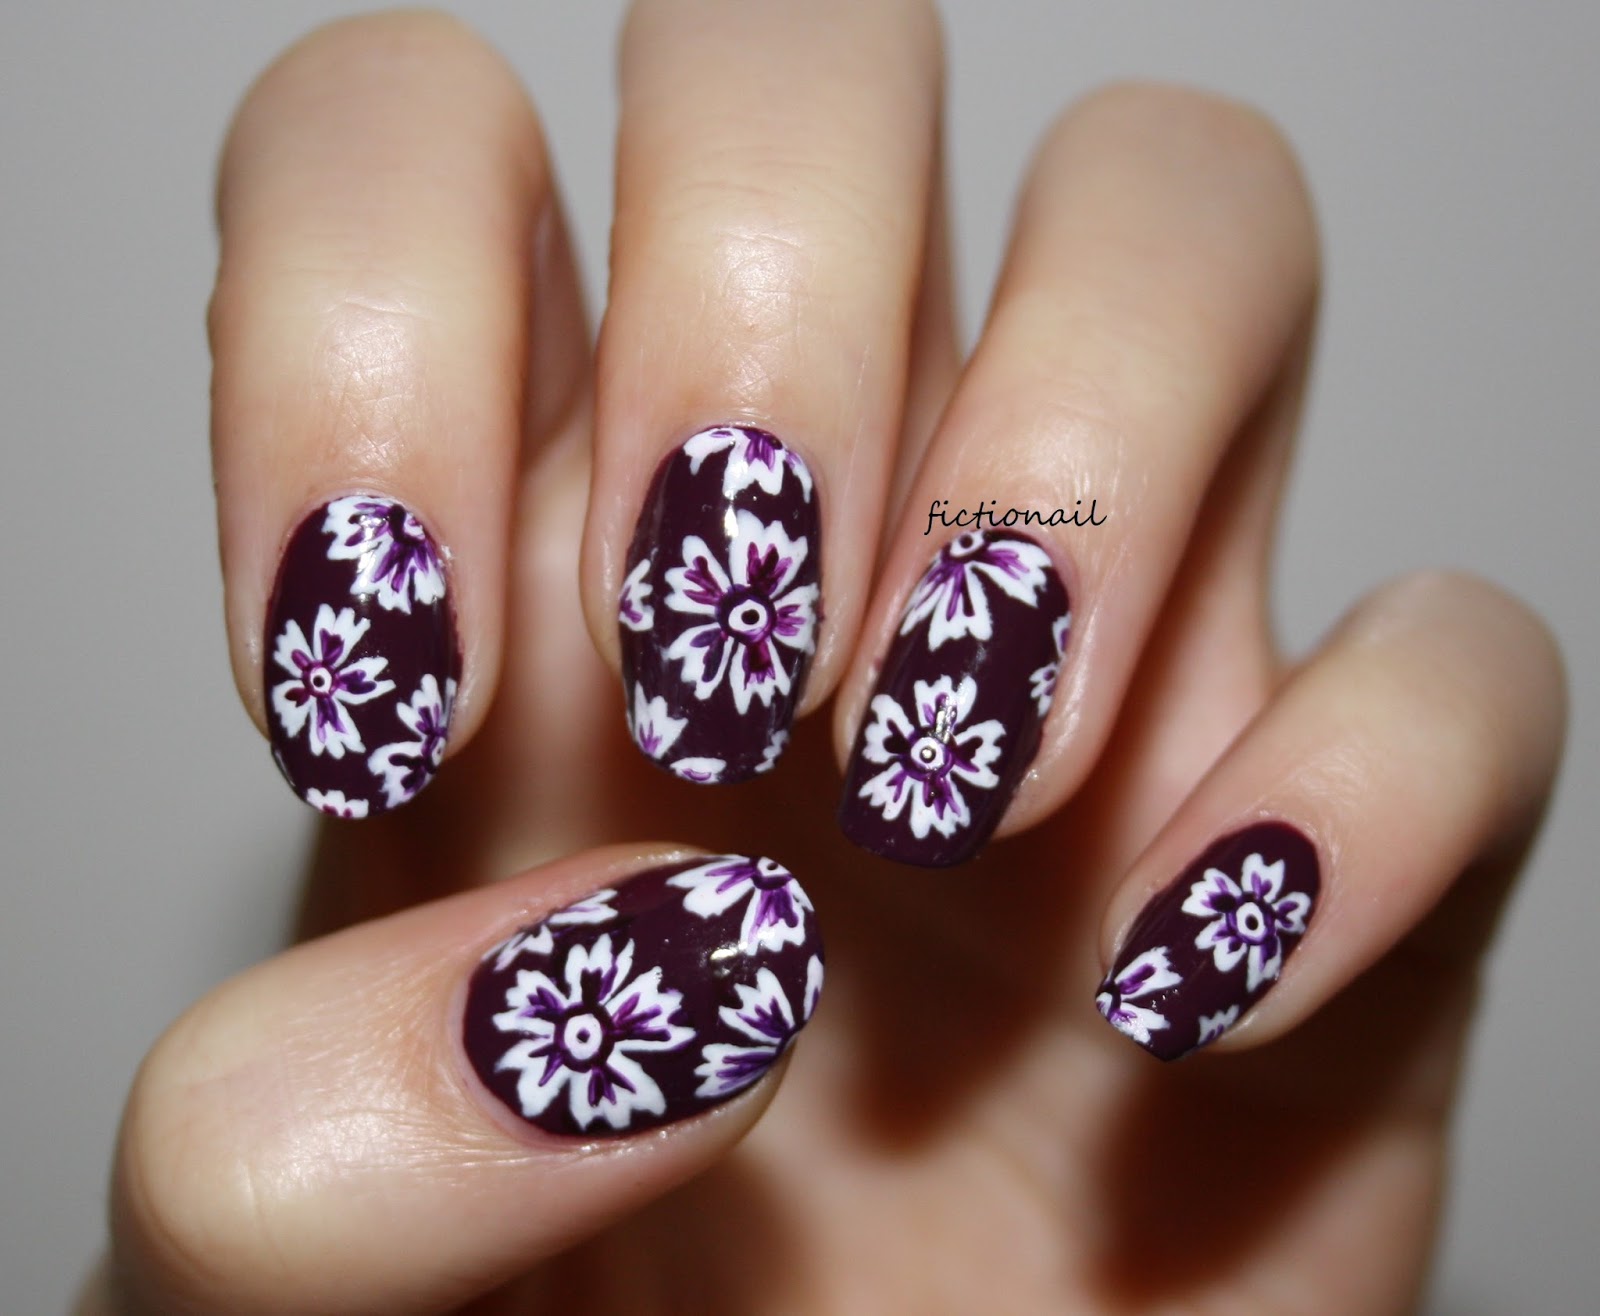 4. Step by Step Guide to Creating Flower Nails - wide 7